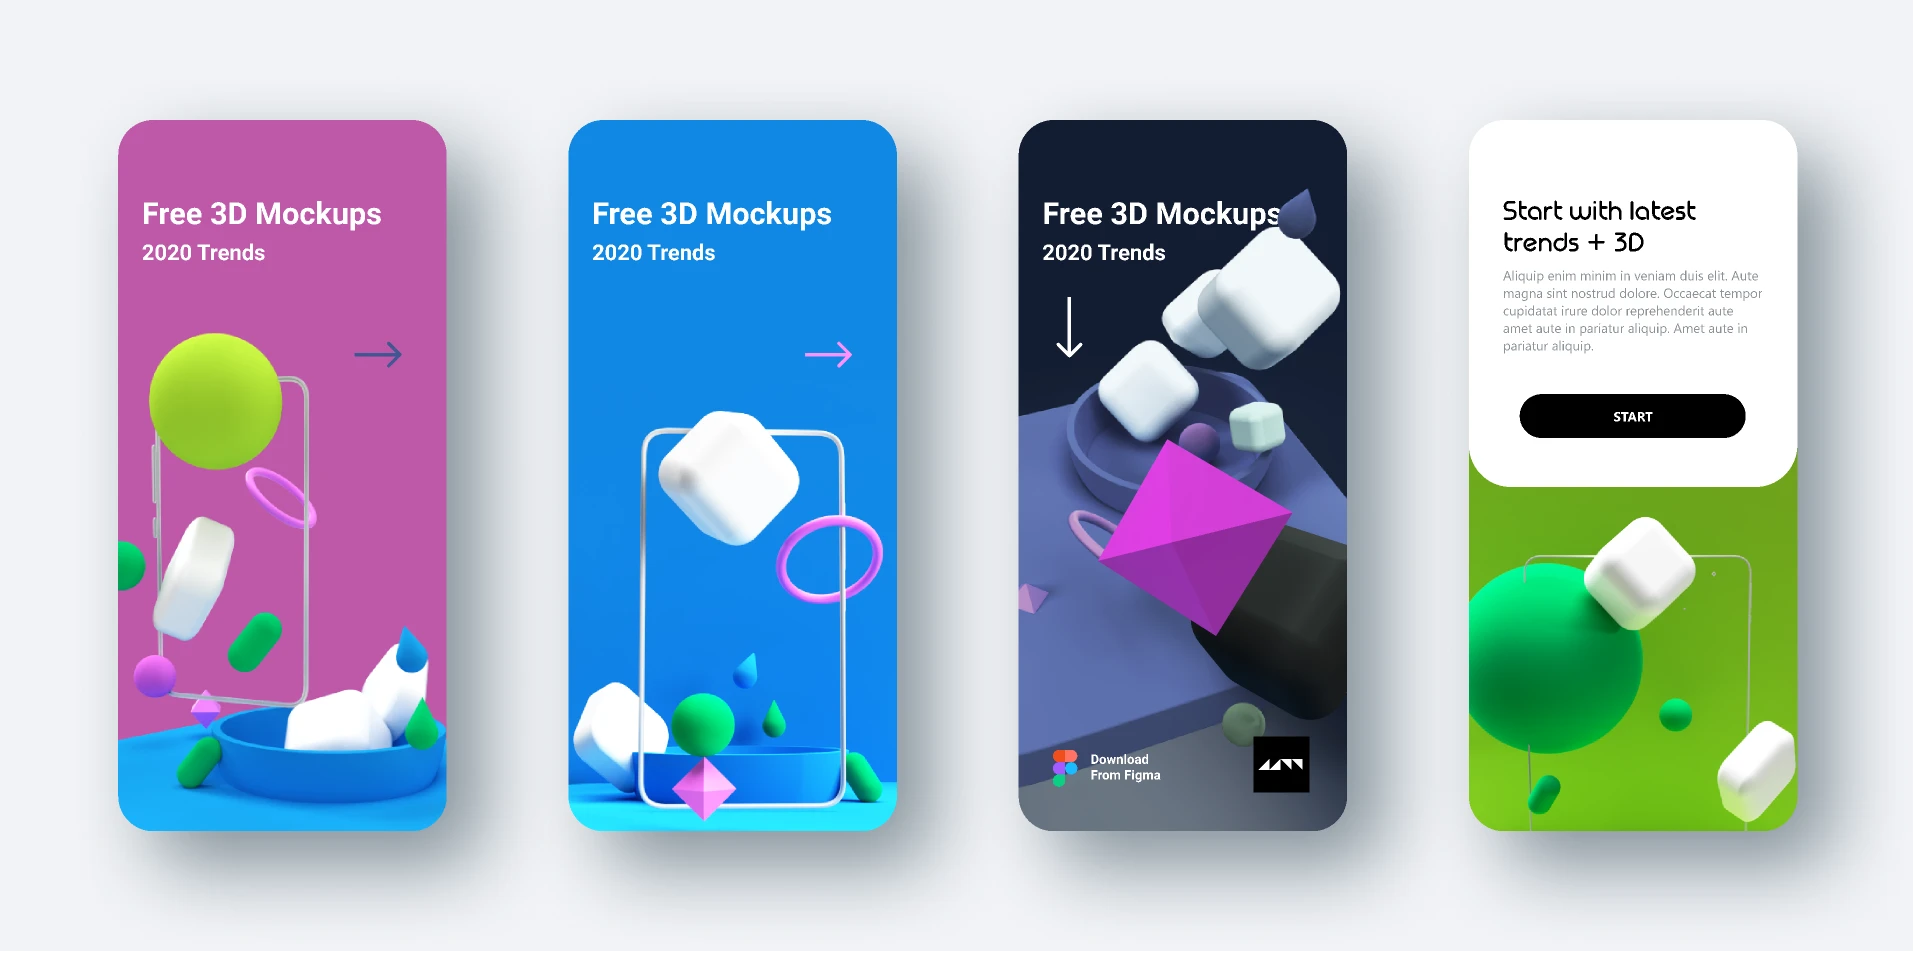  3D models for your new app design for Figma and Adobe XD